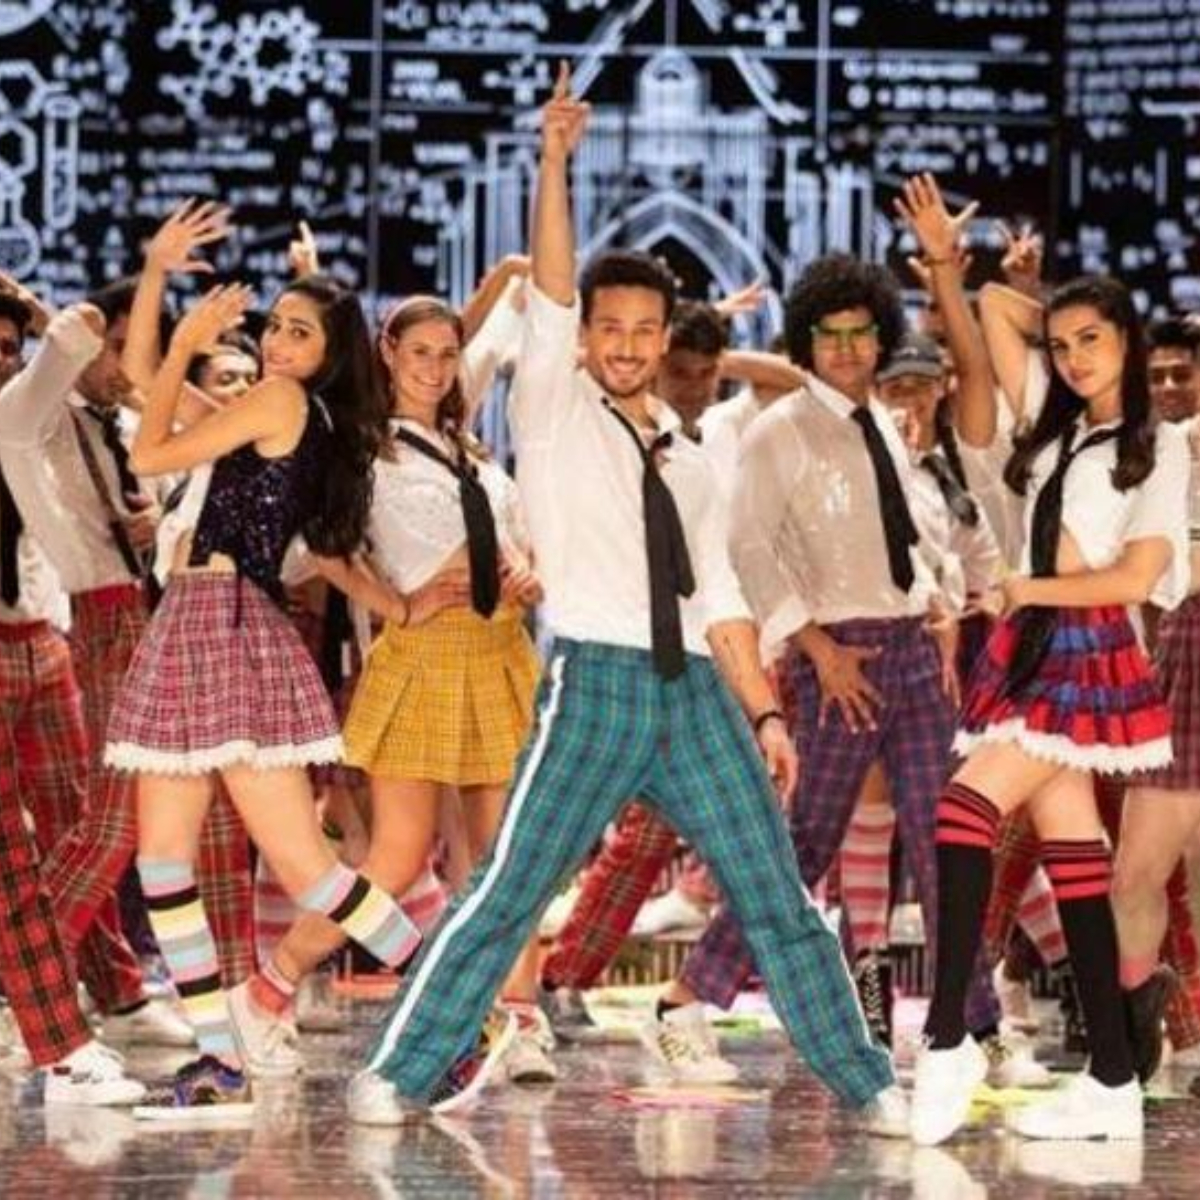 Student of the Year 2 Box Office Collection Day 7: Tiger, Ananya and Tara starrer crosses Rs 50 crore mark